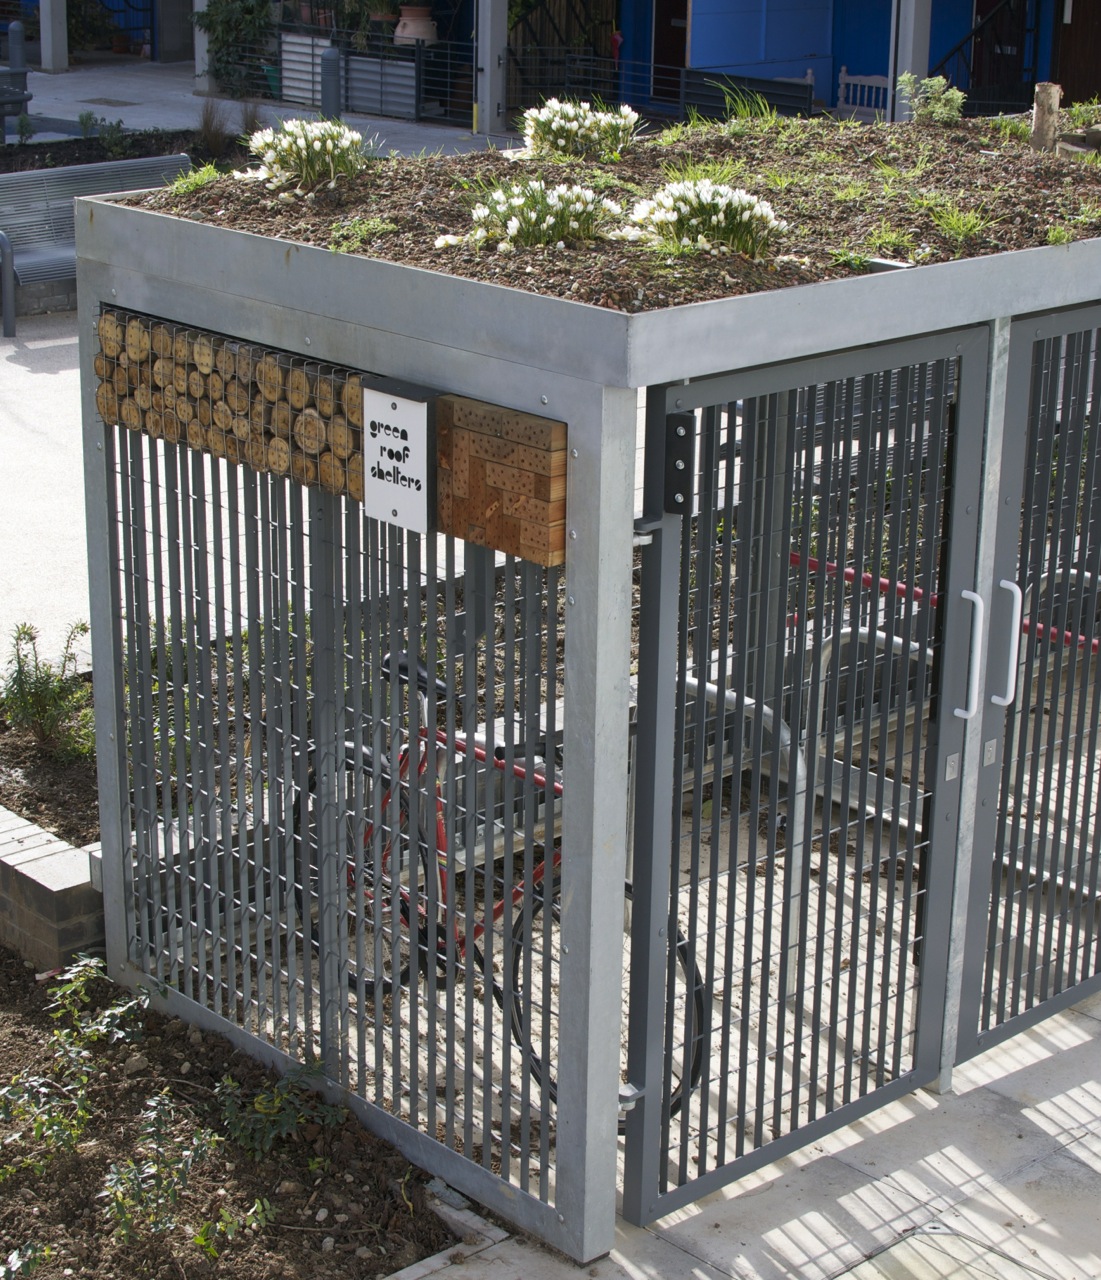 A Bike shed should have a green roof - Small Scale Green Roof Guide